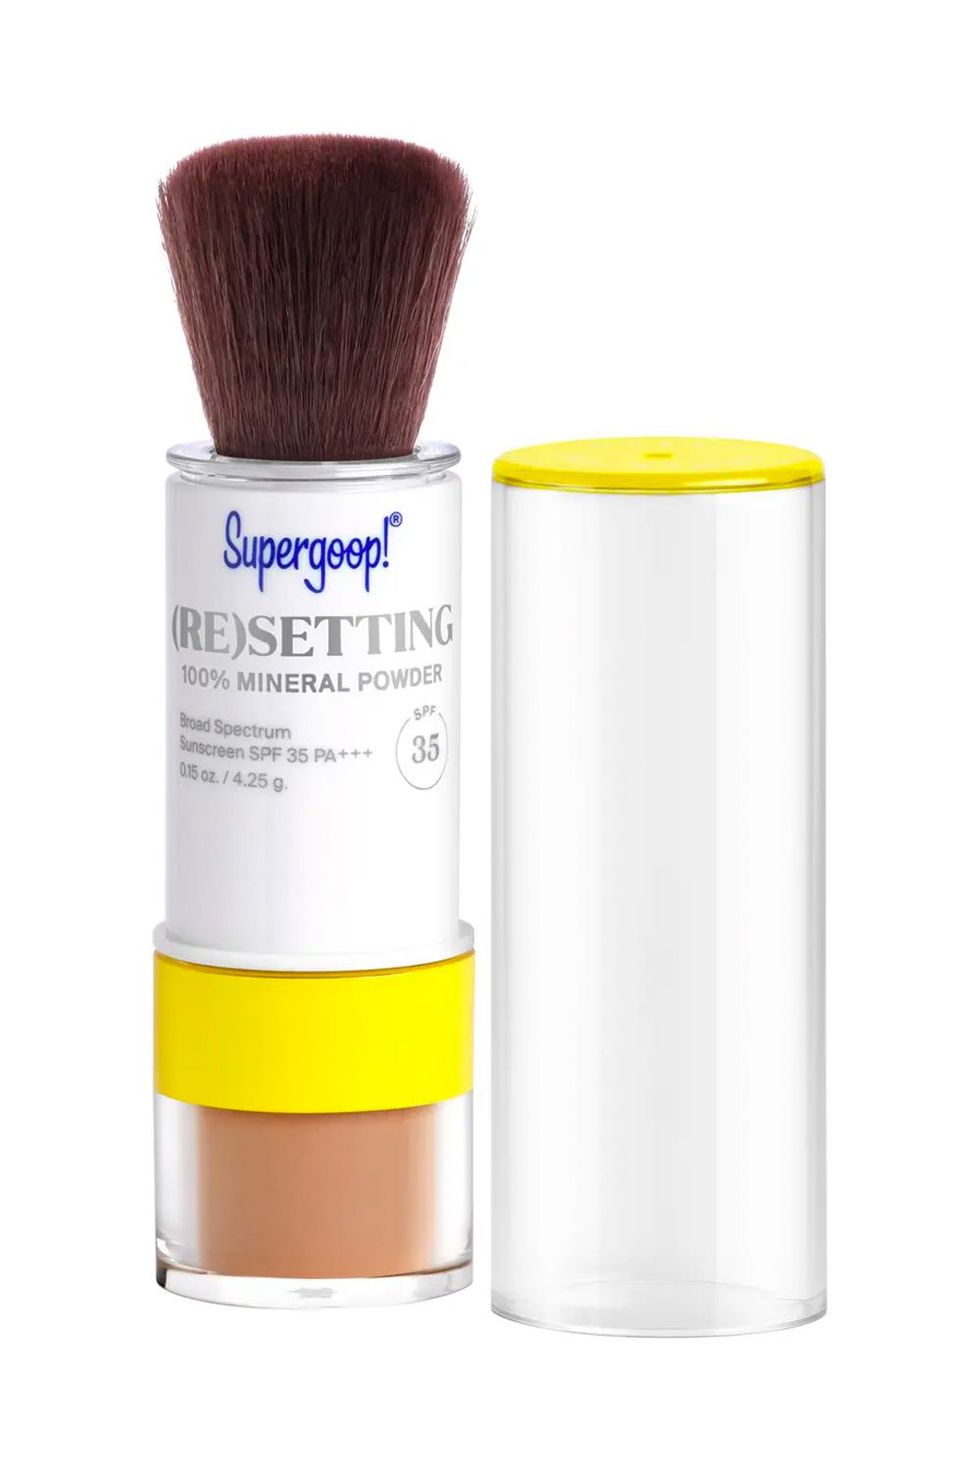 (Re)setting 100% Mineral Powder Sunscreen